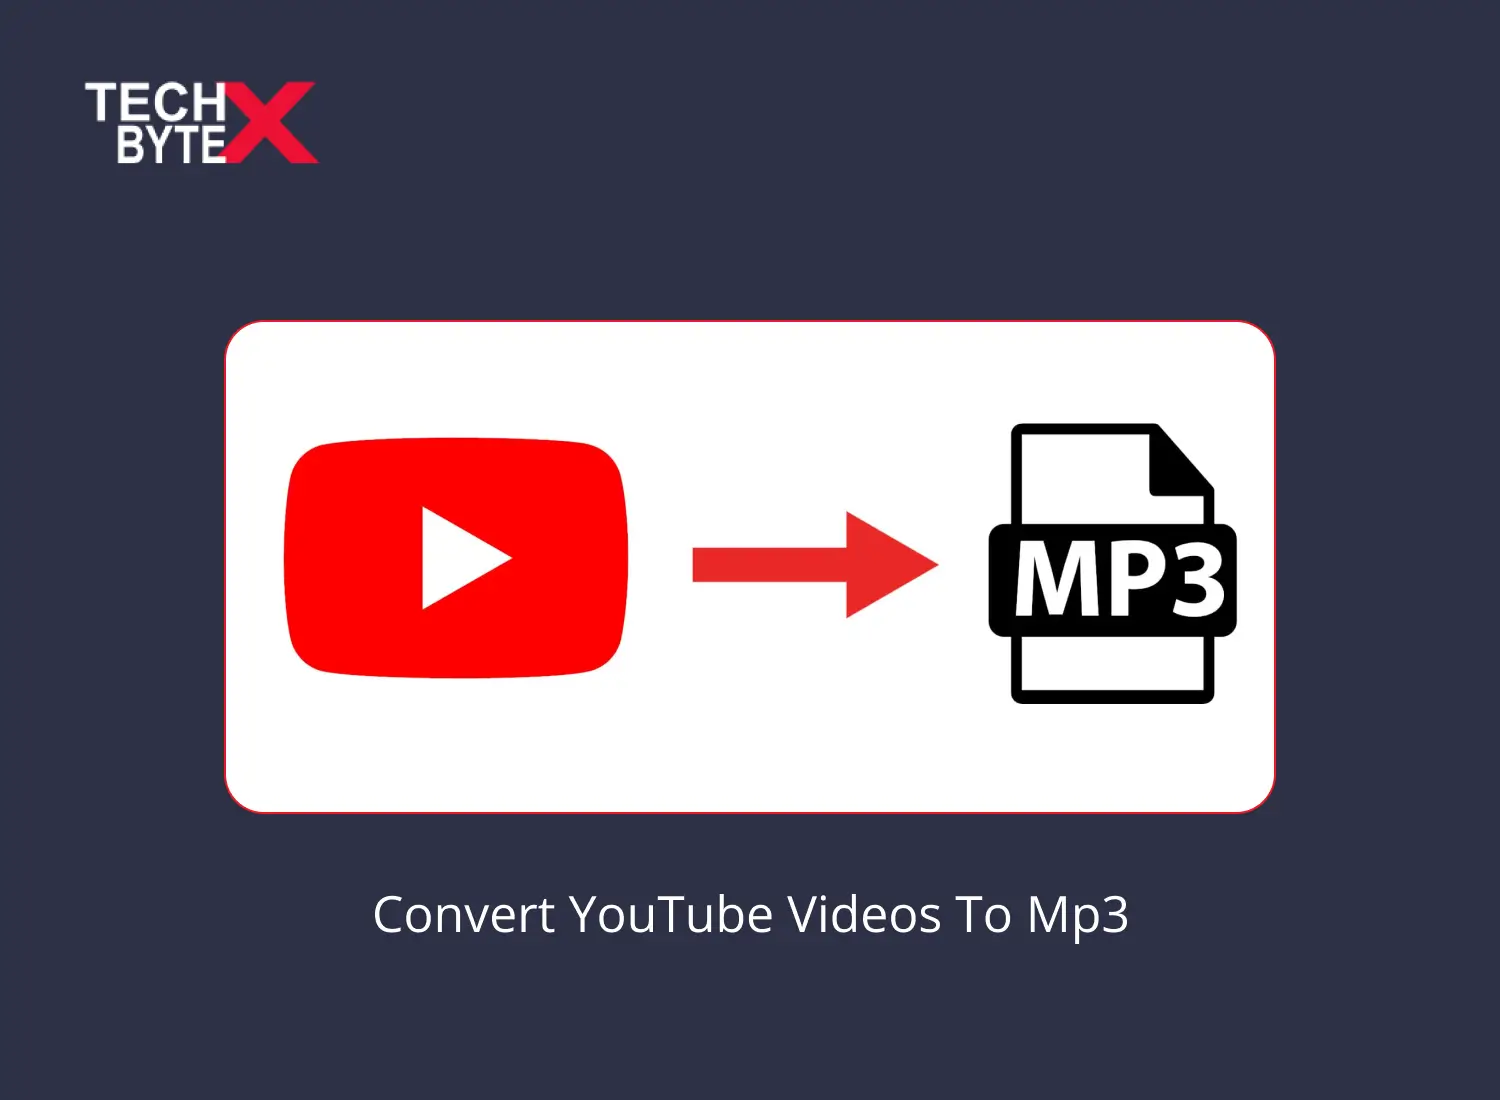 YouTube Videos to MP3